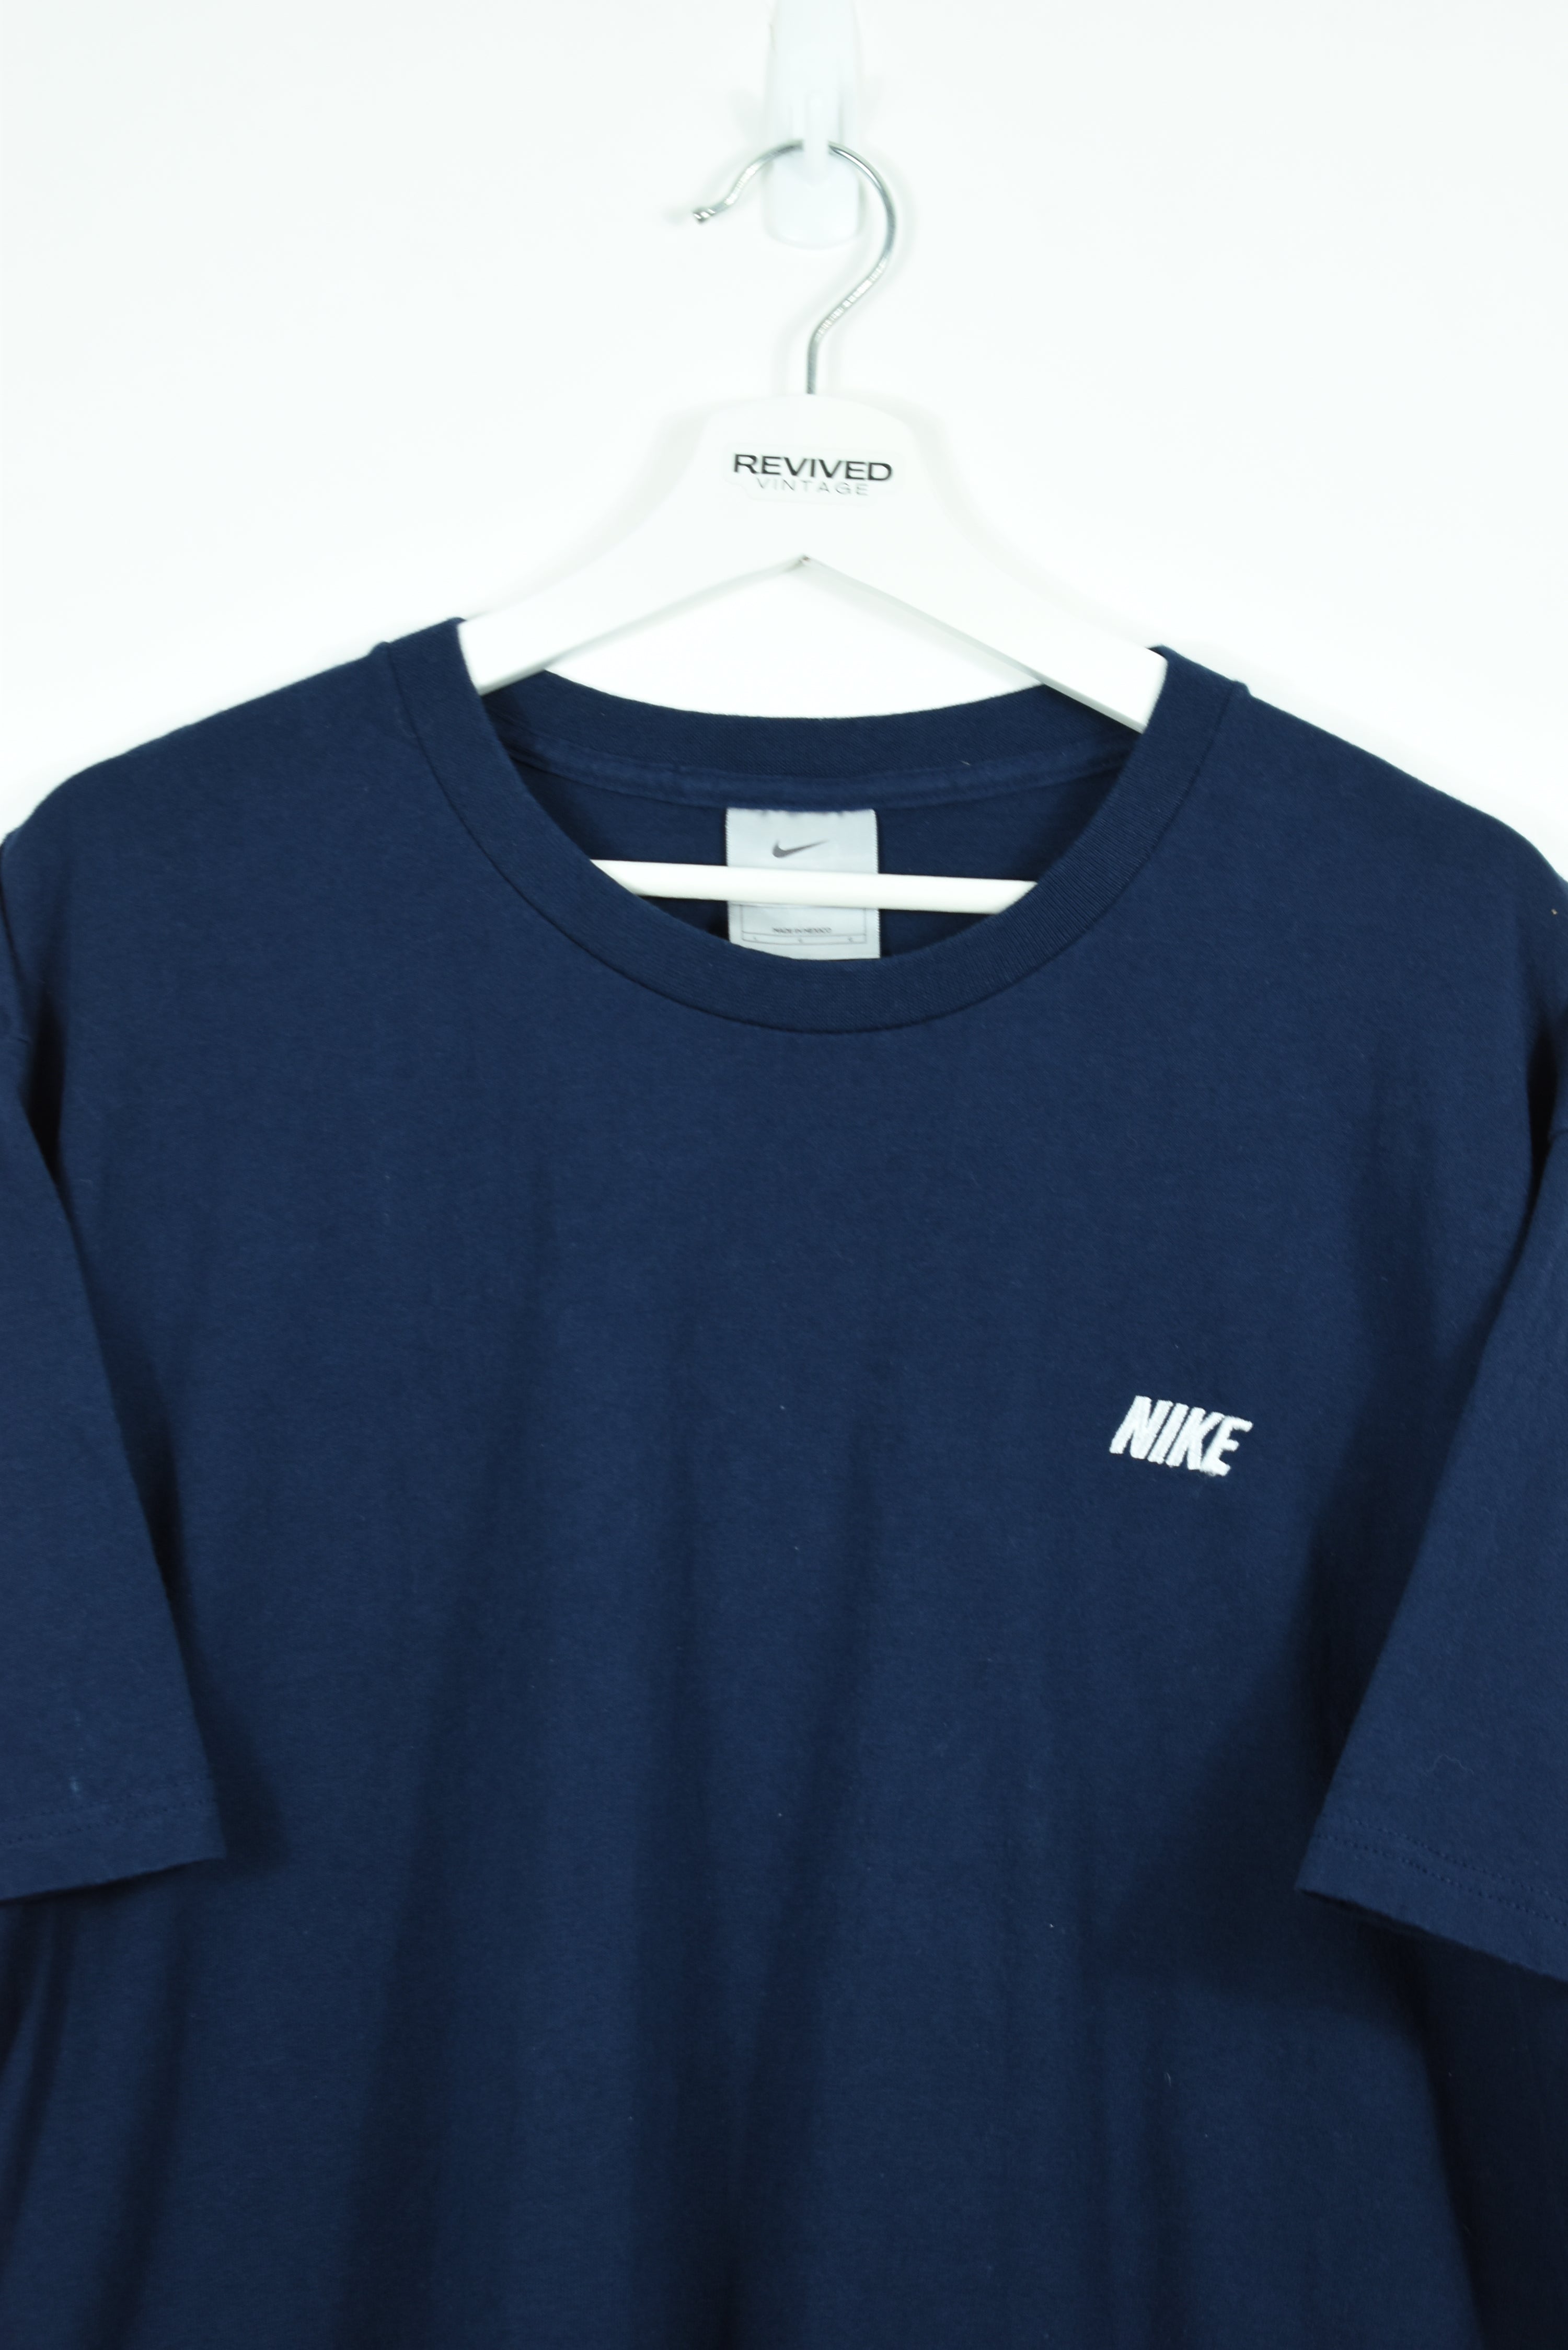 VINTAGE NIKE EMBROIDERY SPELLOUT T SHIRT NAVY XLARGE